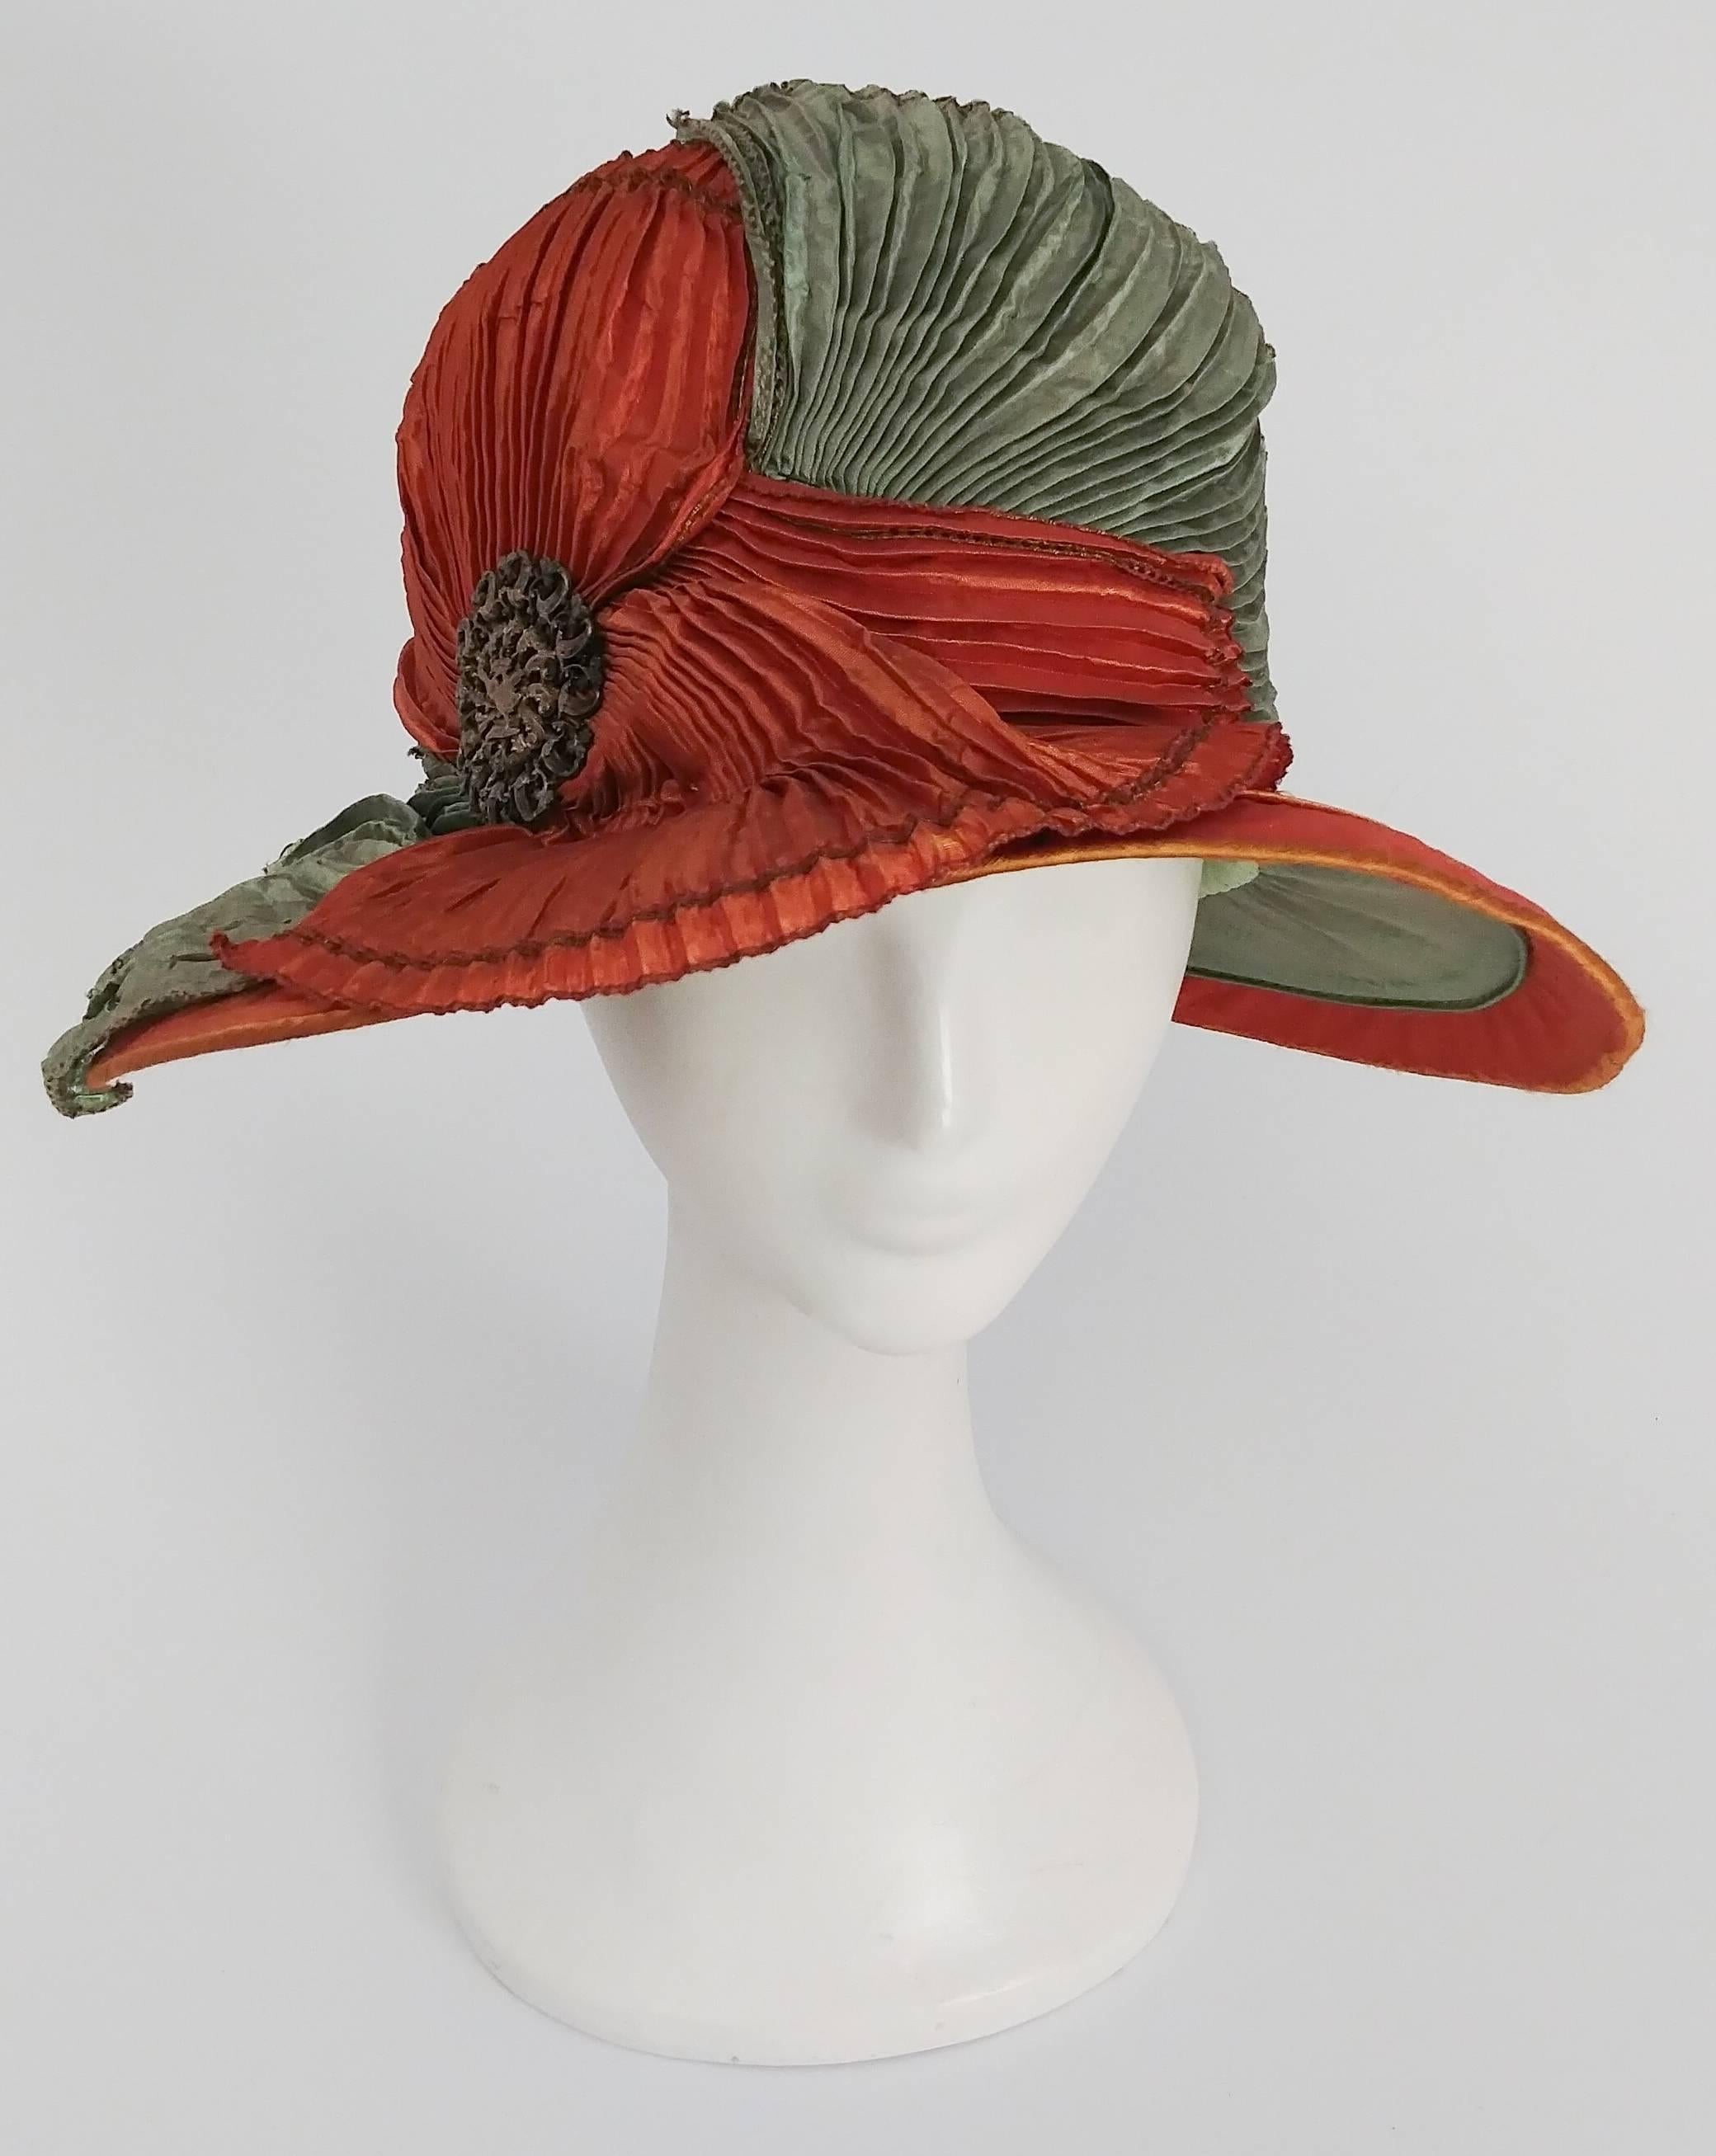 1920s Burnt Orange & Seafoam Green Wide Brim Cloche Hat. Pleated fabric drapes across the front of this hat, furthered embellished with art nouveau pin on side. Sits low over eyes for true 20s look. 